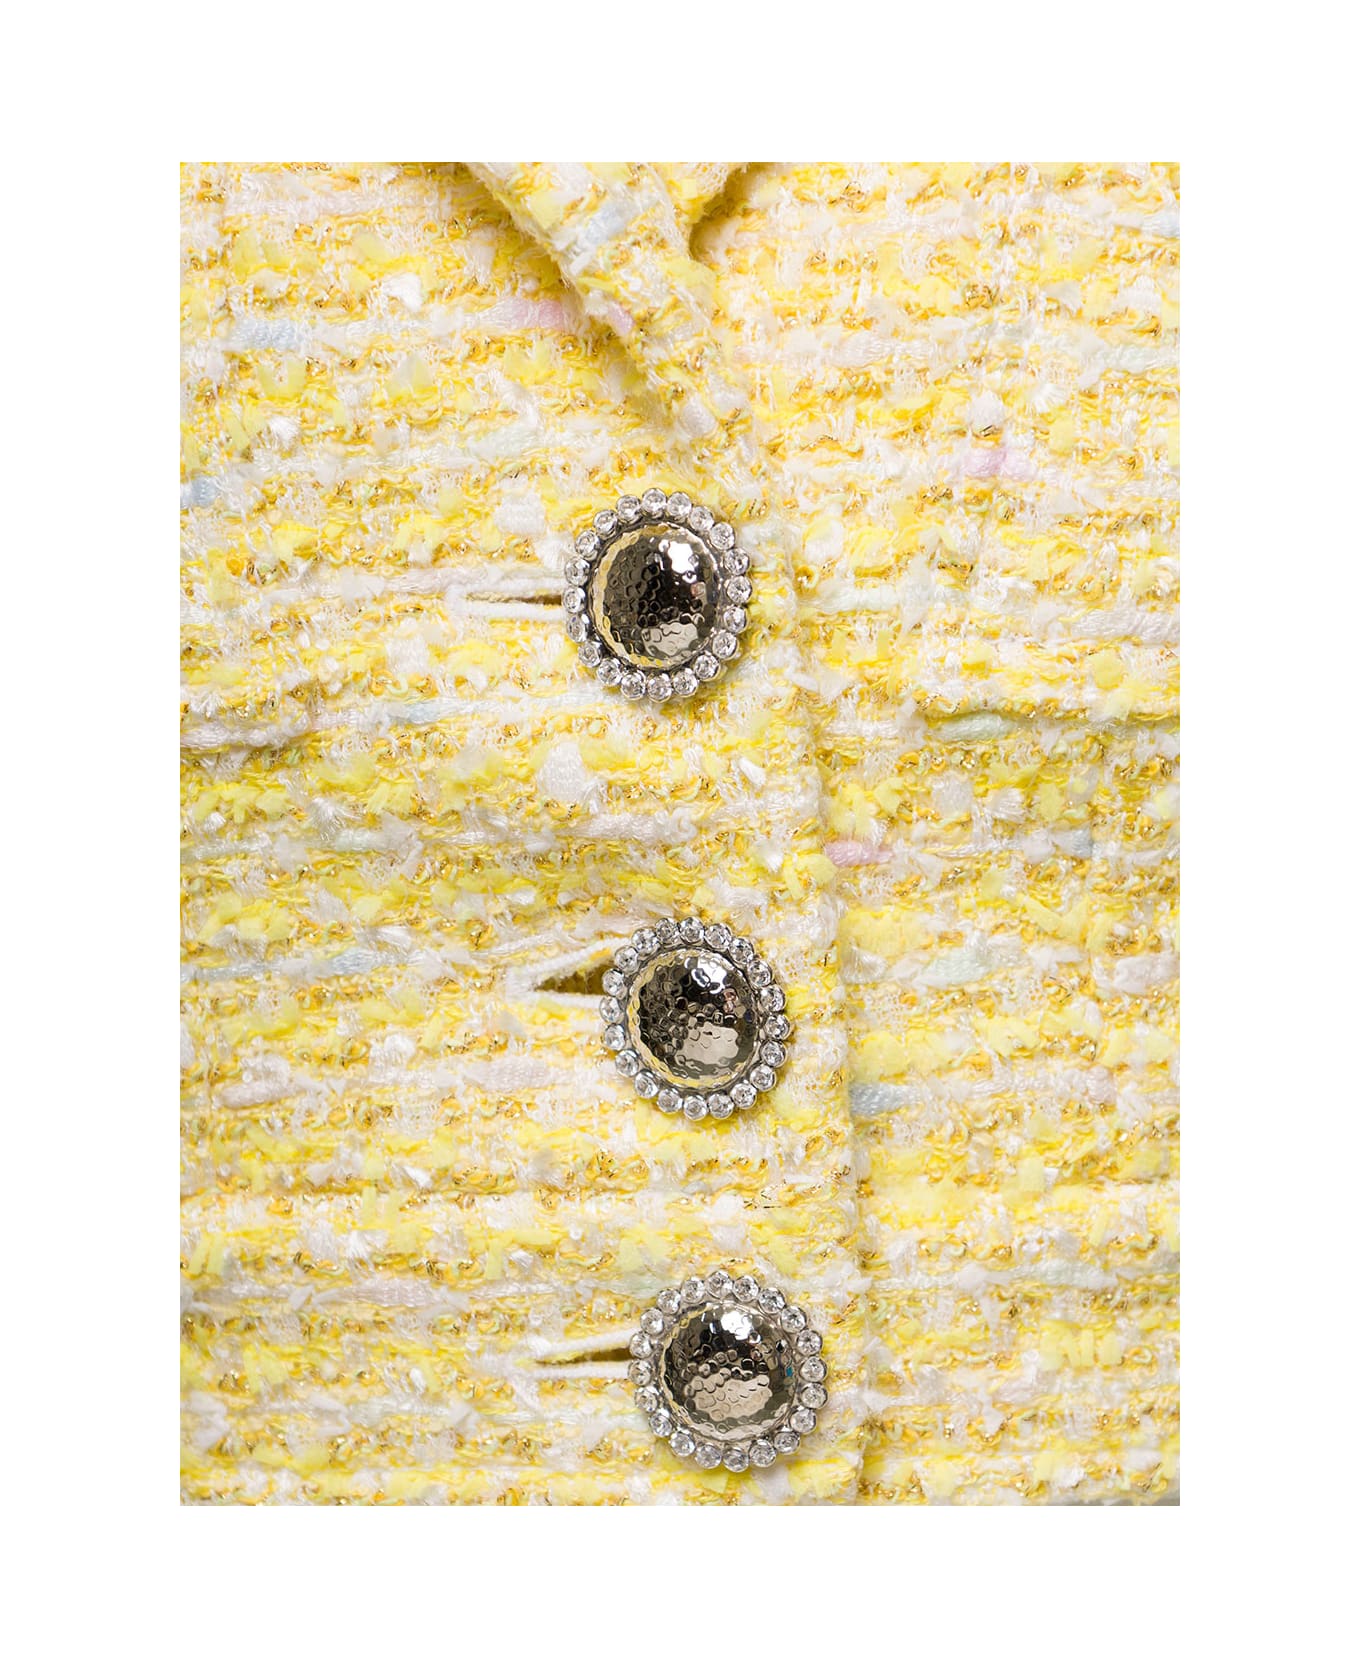 Alessandra Rich Cropped Jacket With Pockets And Silver Buttons In Tweed Lurex Yellow Woman - Yellow ジャケット